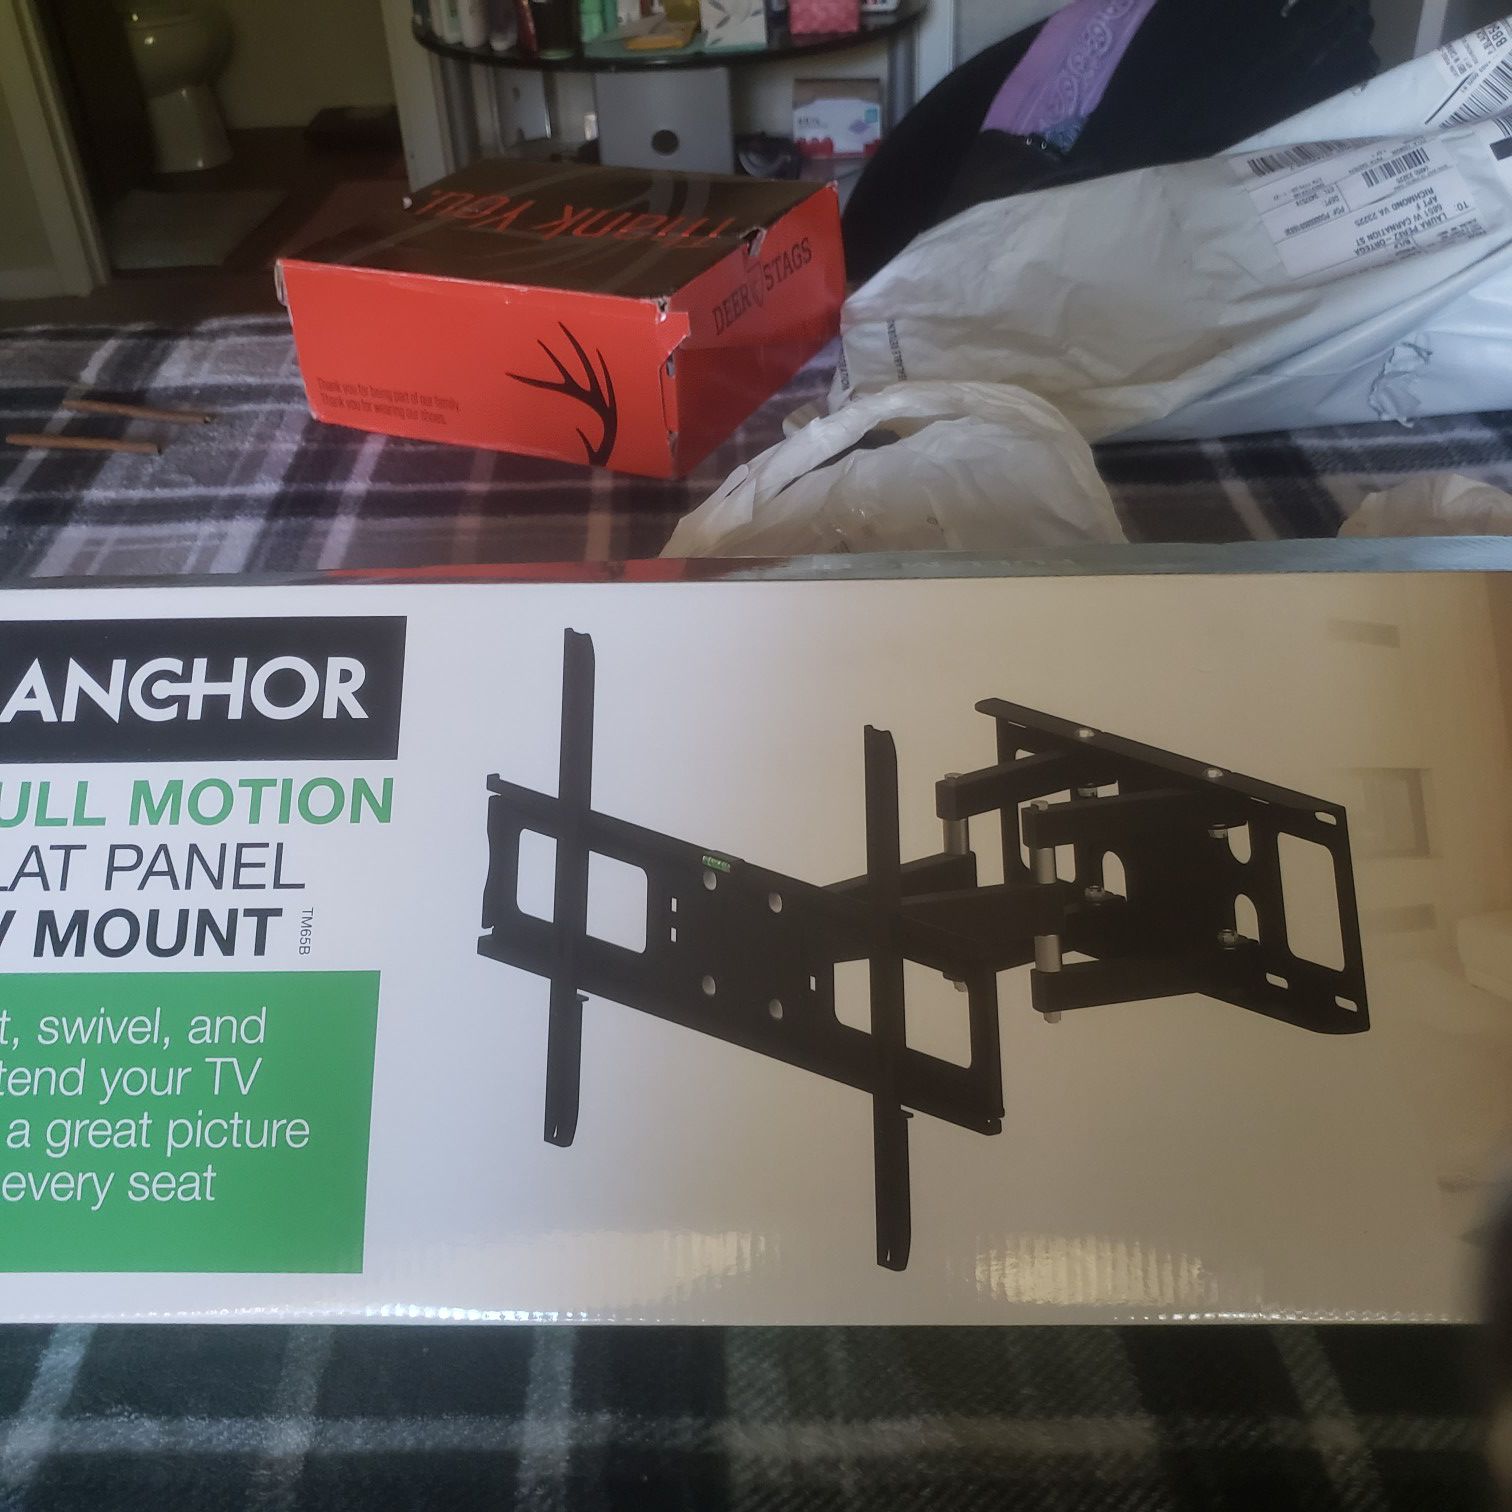 Anchor Tilt Swivel and Pull forward Mount for a Flat screen TV up to 70inches